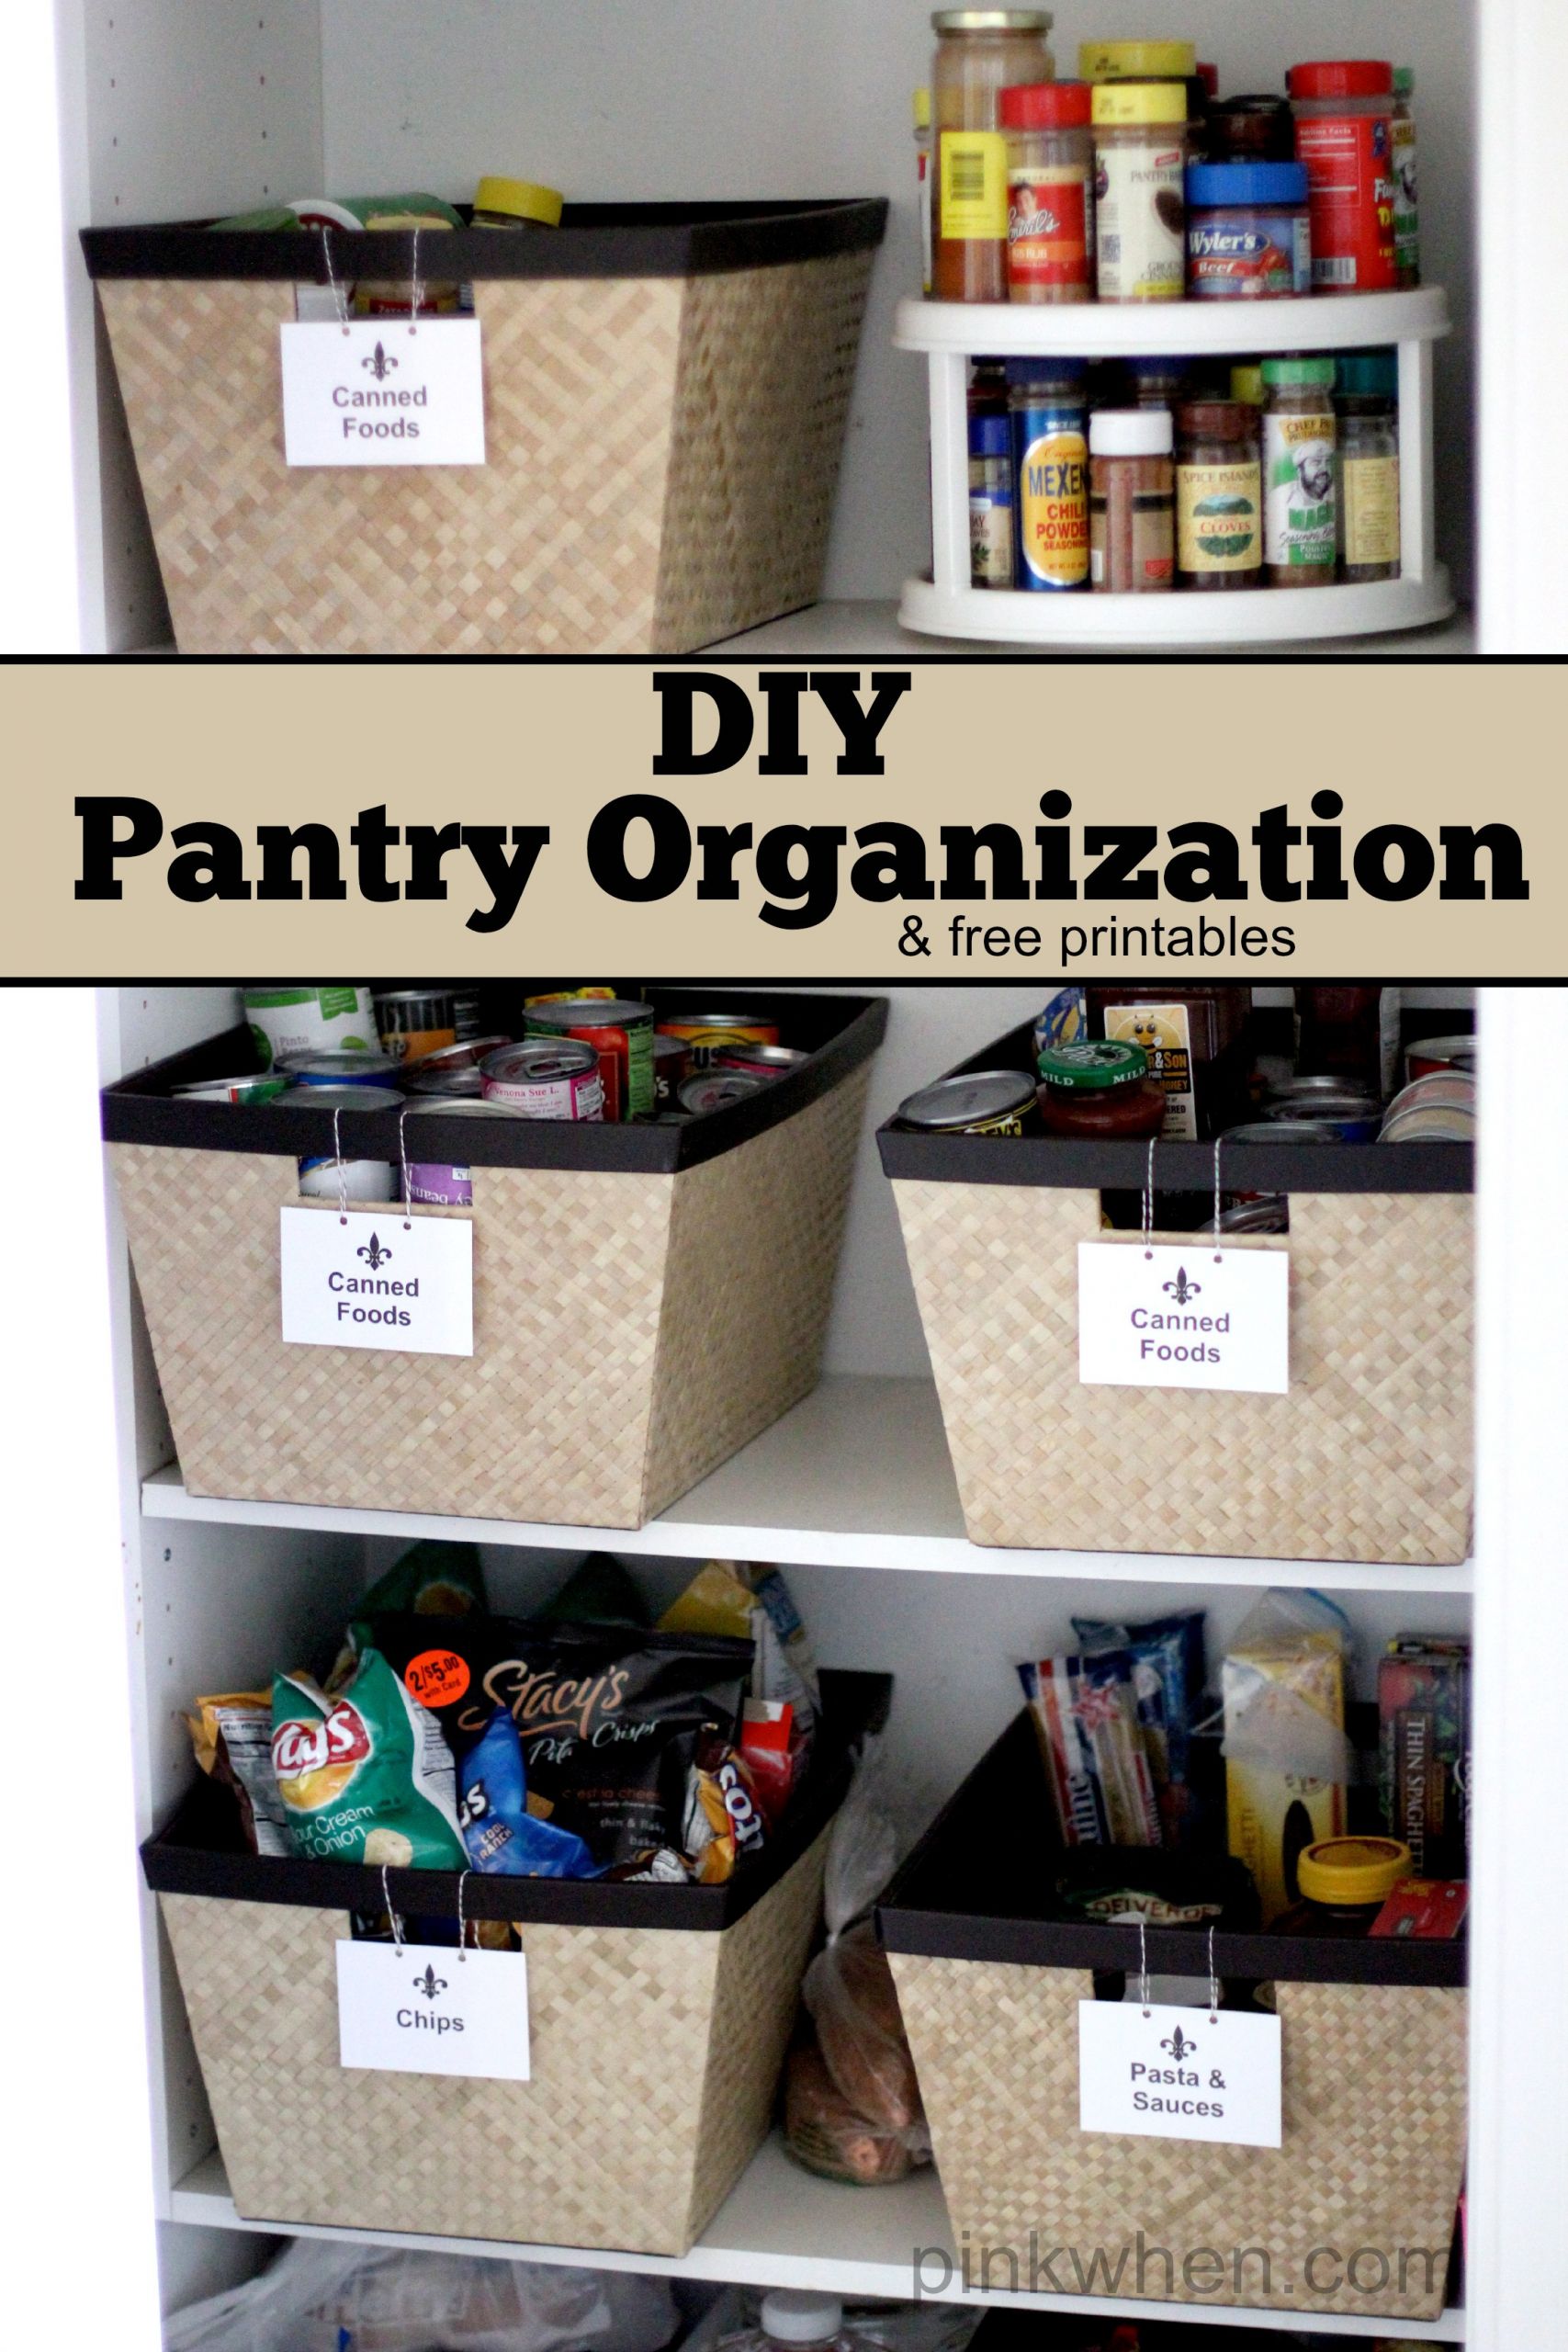 Kitchen Organizers Diy
 Pantry Organization Page 2 of 2 Blooming Homestead